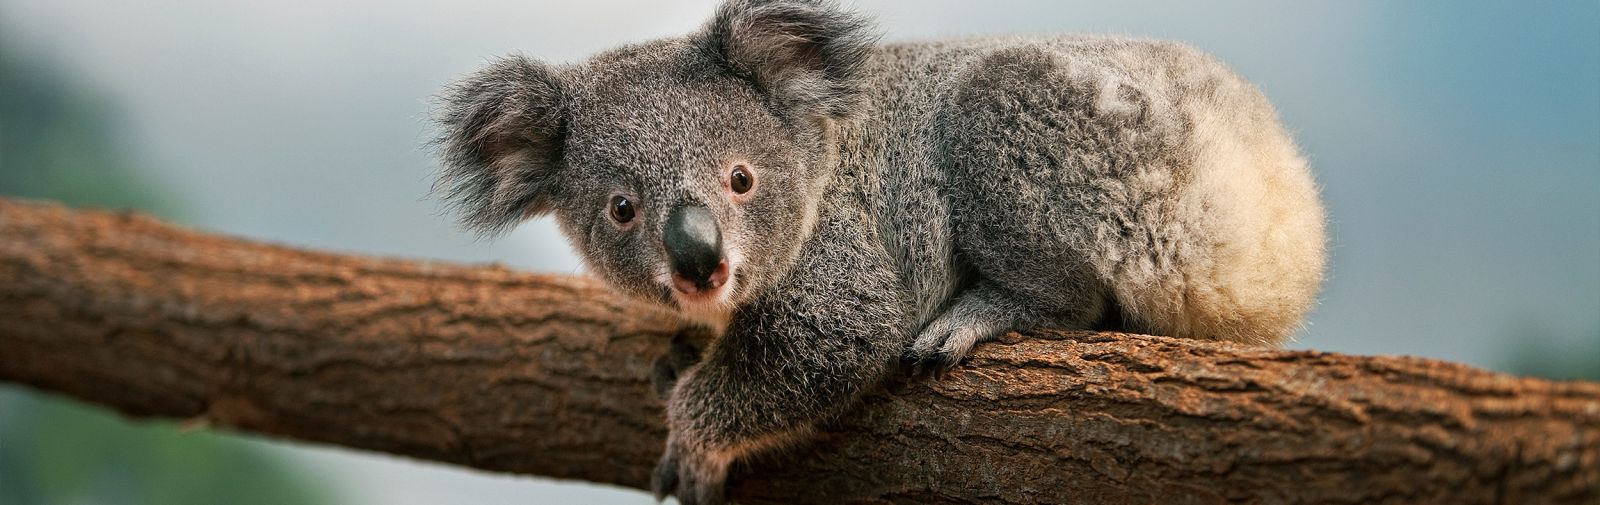 How can we help save the koalas